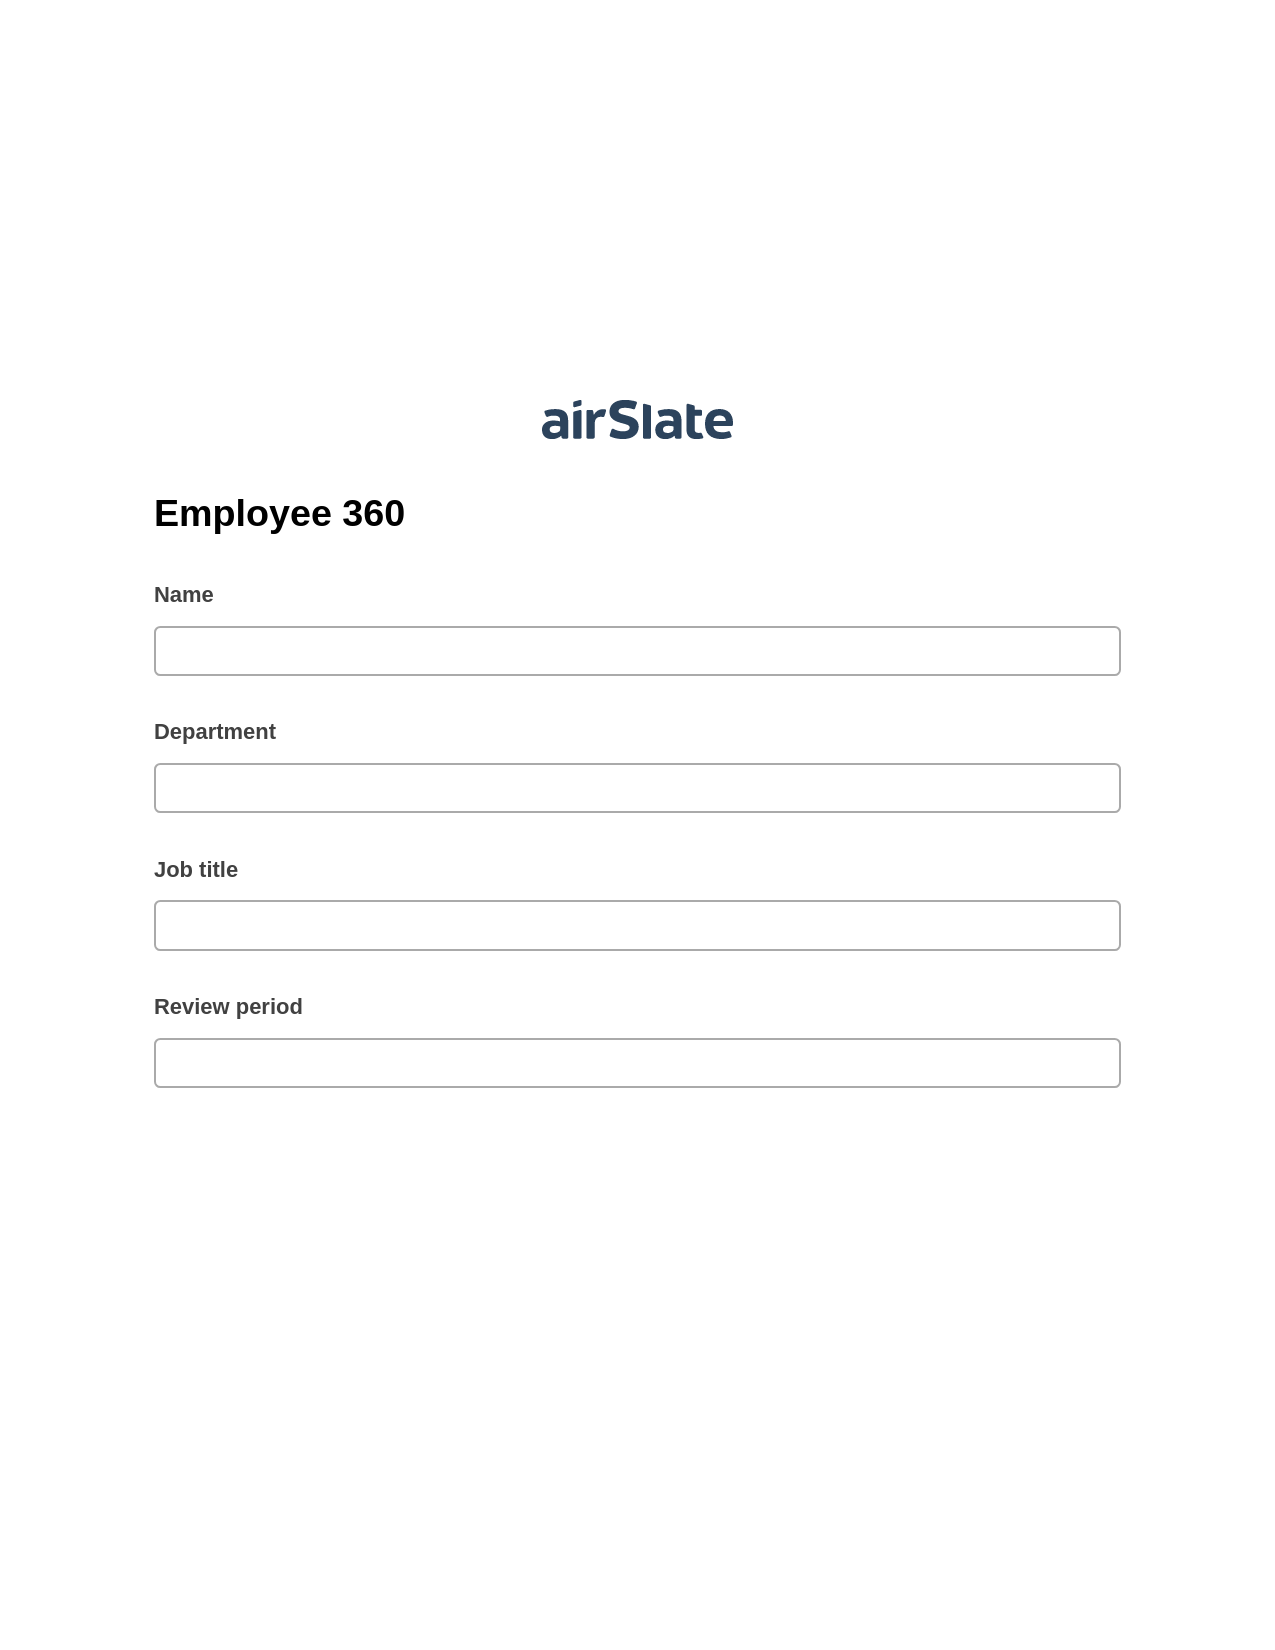 Employee 360 Pre-fill from CSV File Bot, Invoke Salesforce Process Bot, Export to Salesforce Record Bot